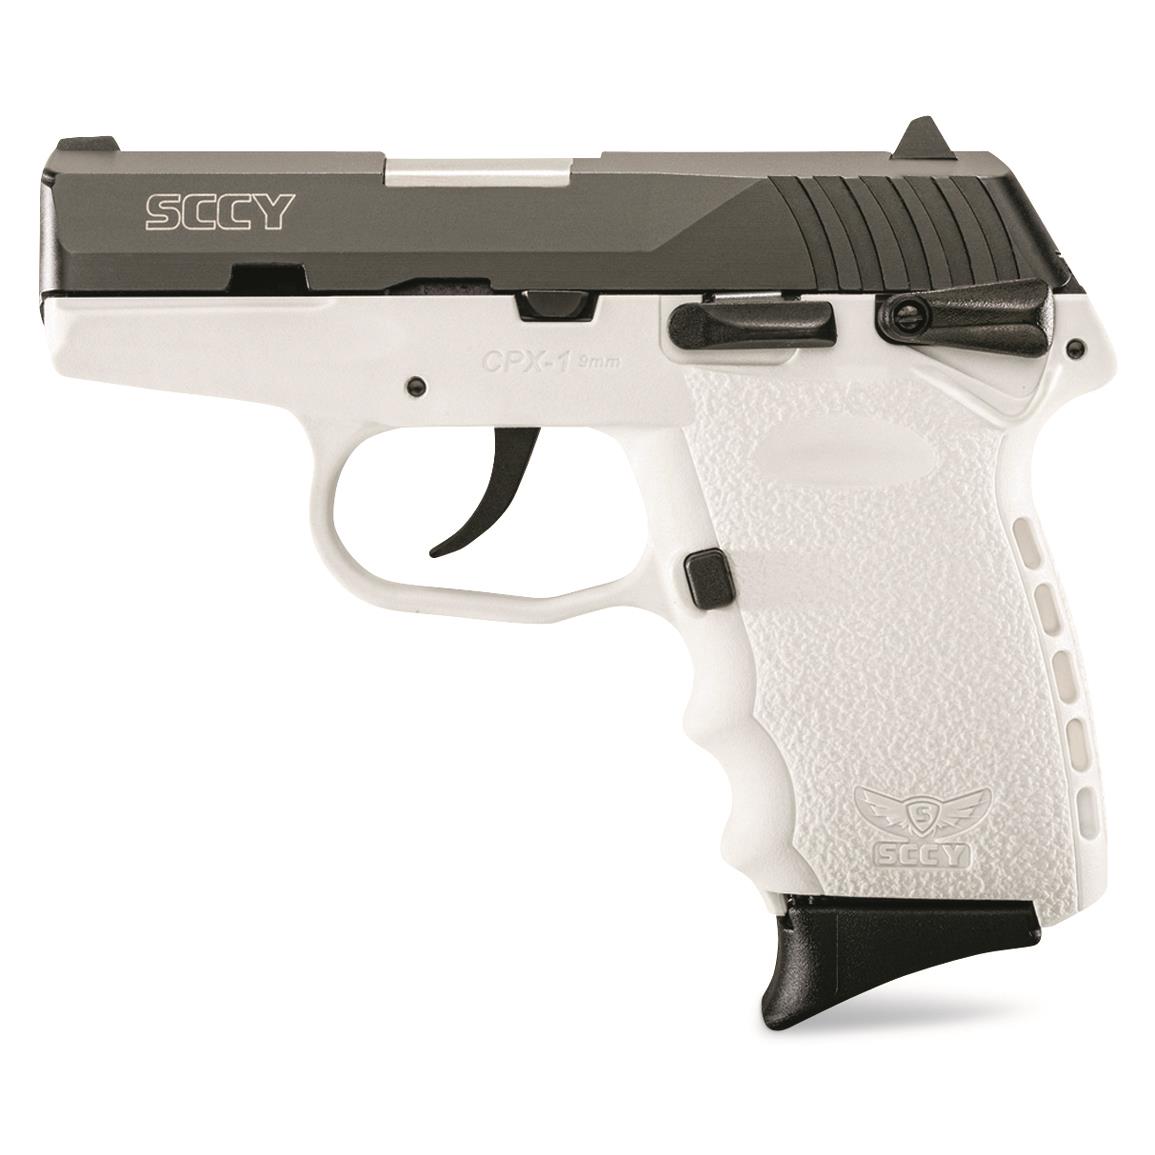 SCCY CPX-1, Semi-automatic, 9mm, 3.1" Barrel, White/Black Nitride, 10+1 Rounds